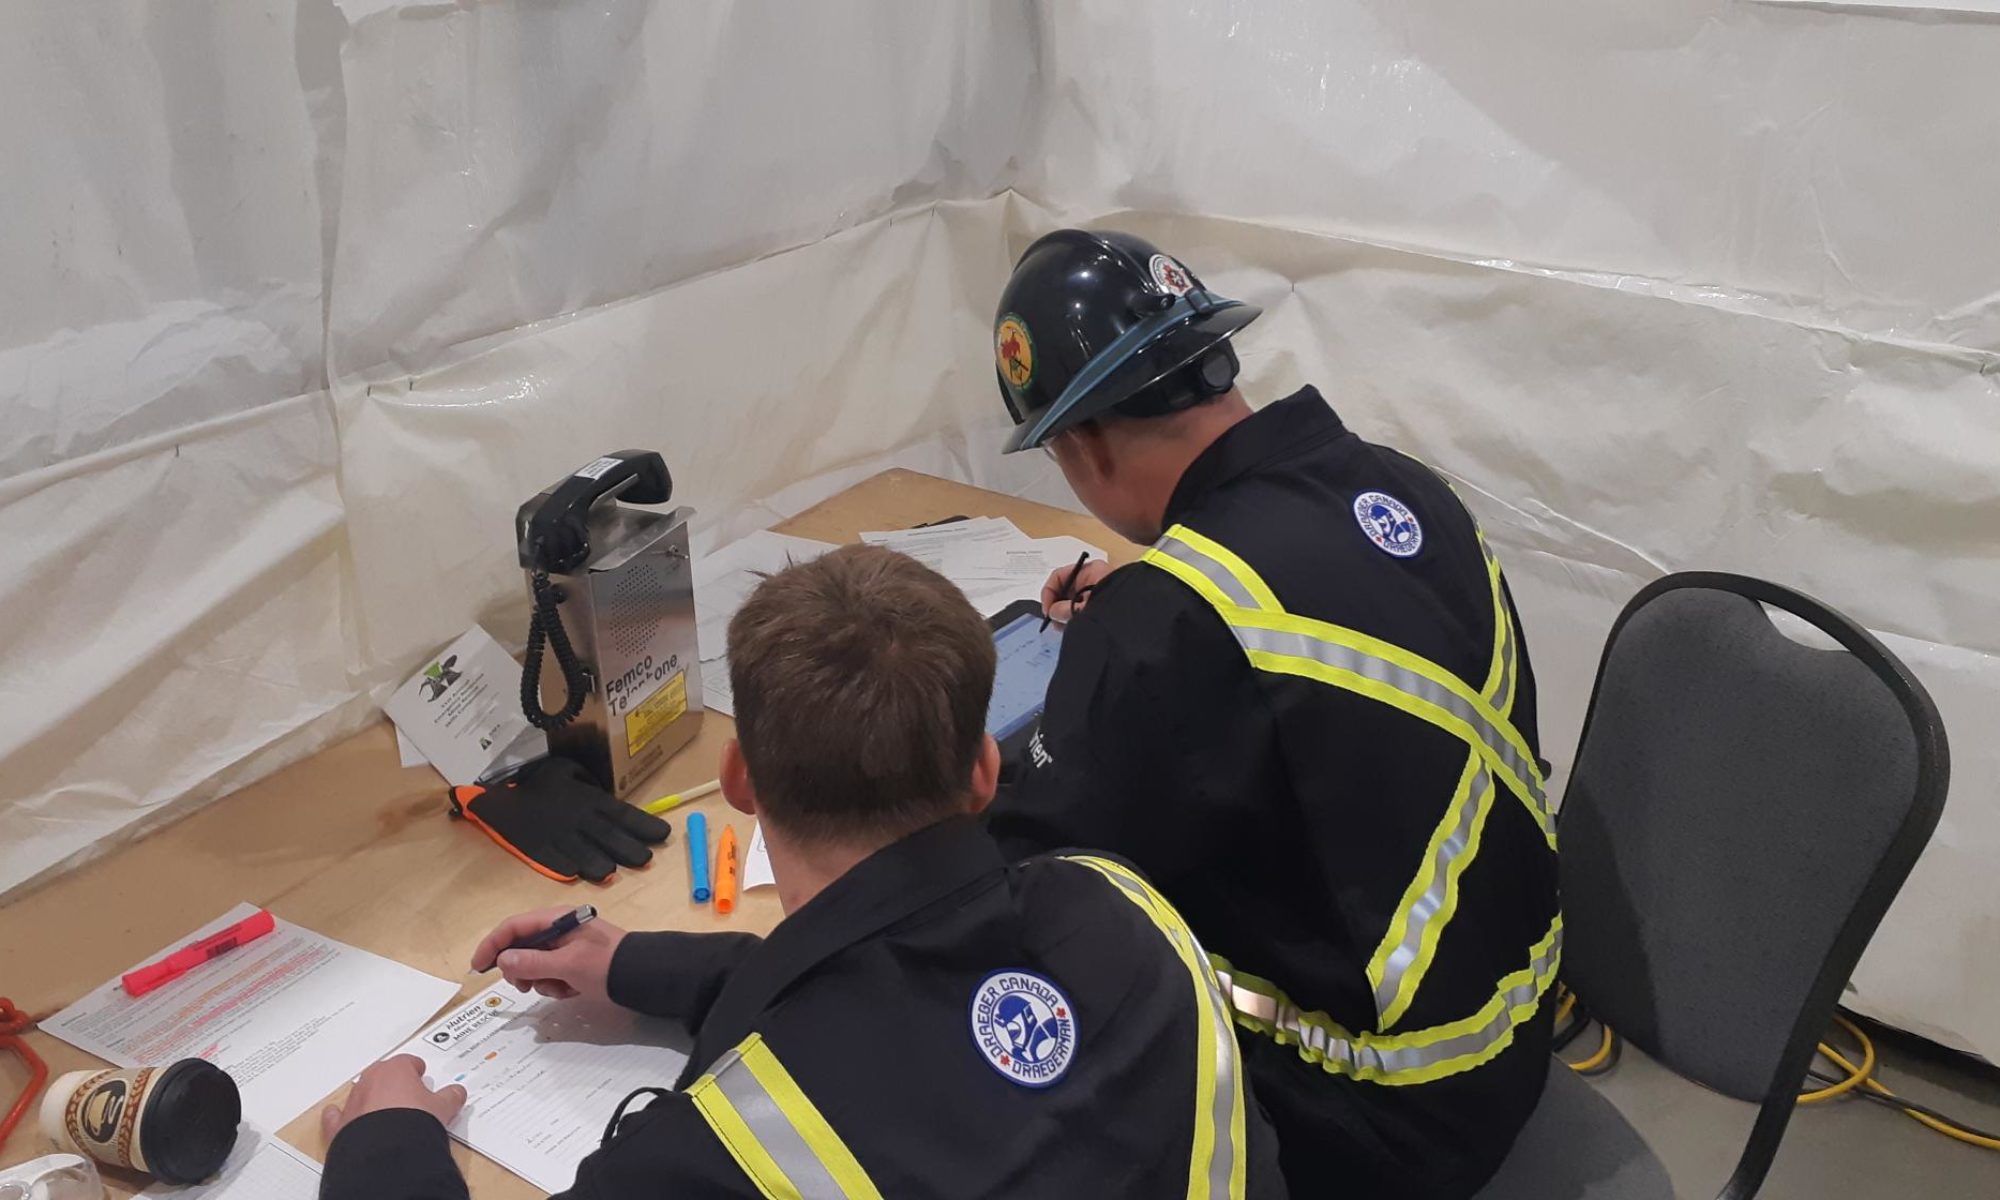 Team members using mine rescue software on a tablet